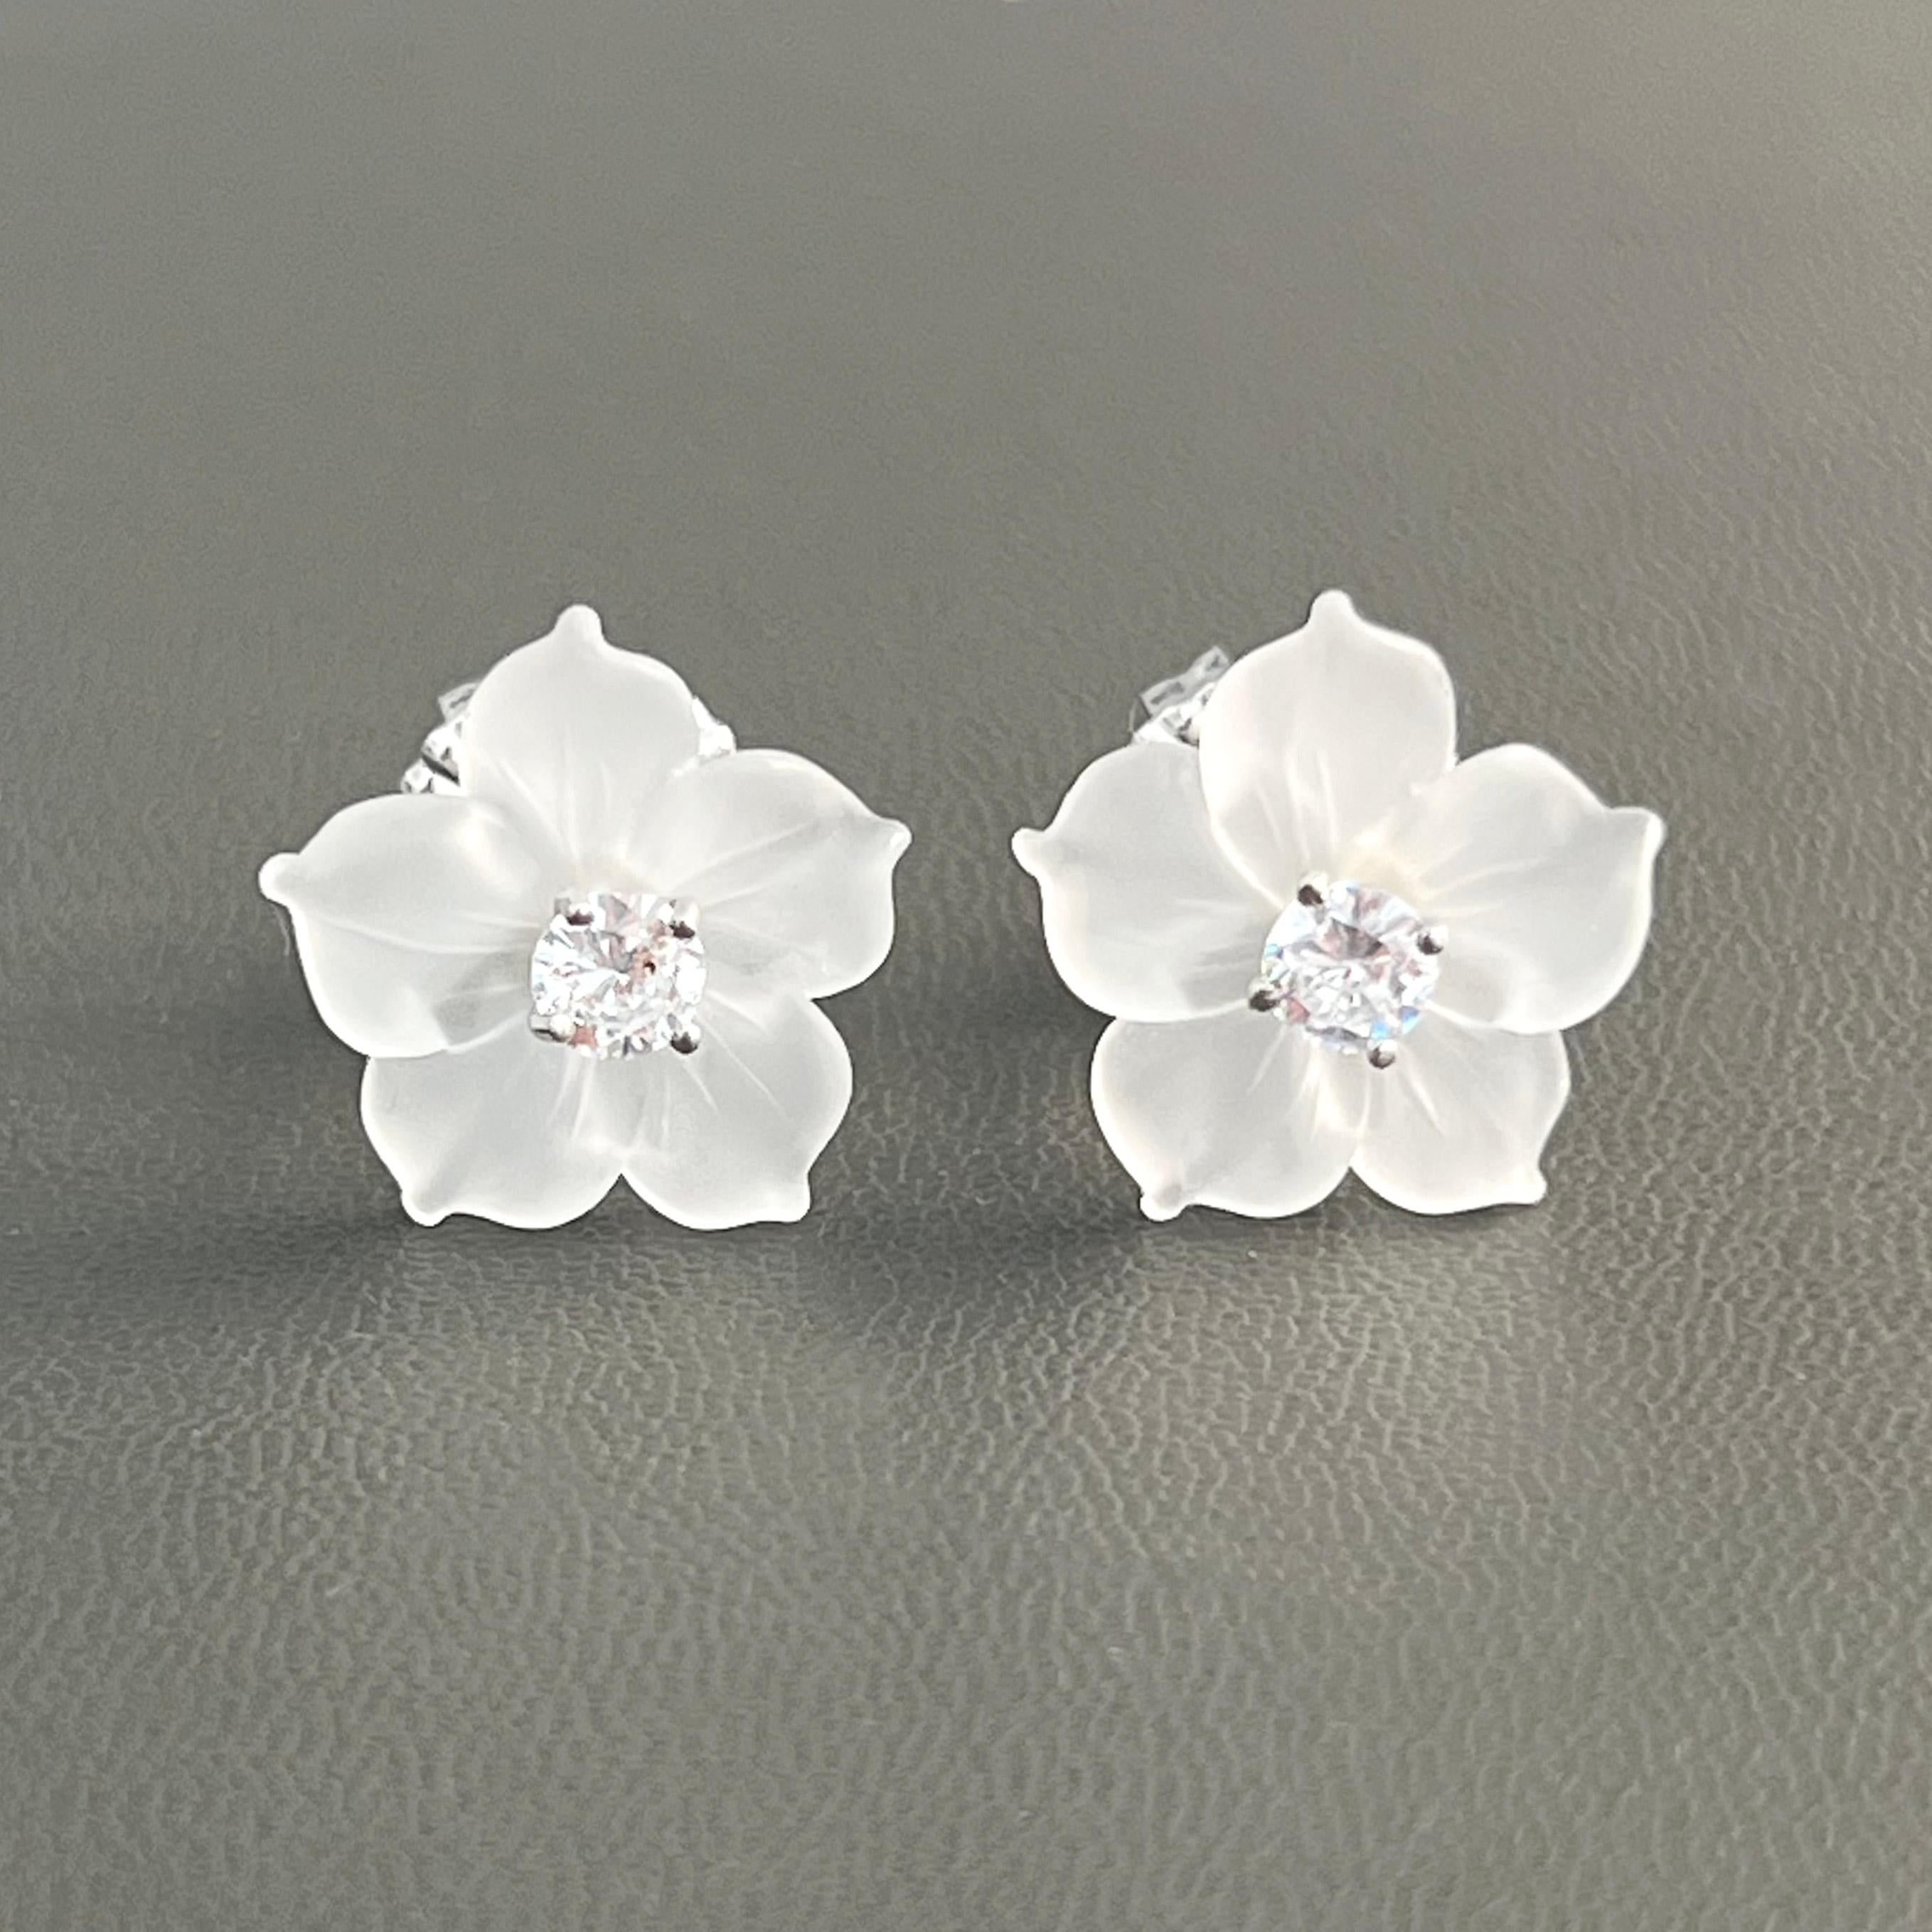 Elegant 14mm Carved Frosted Quartz Flower Sterling Silver Earrings

This earrings features 14mm frosted quartz carved into beautiful three dimension flower, adorned with round simulated diamond (1/2 carat size), handset in platinum  rhodium plated